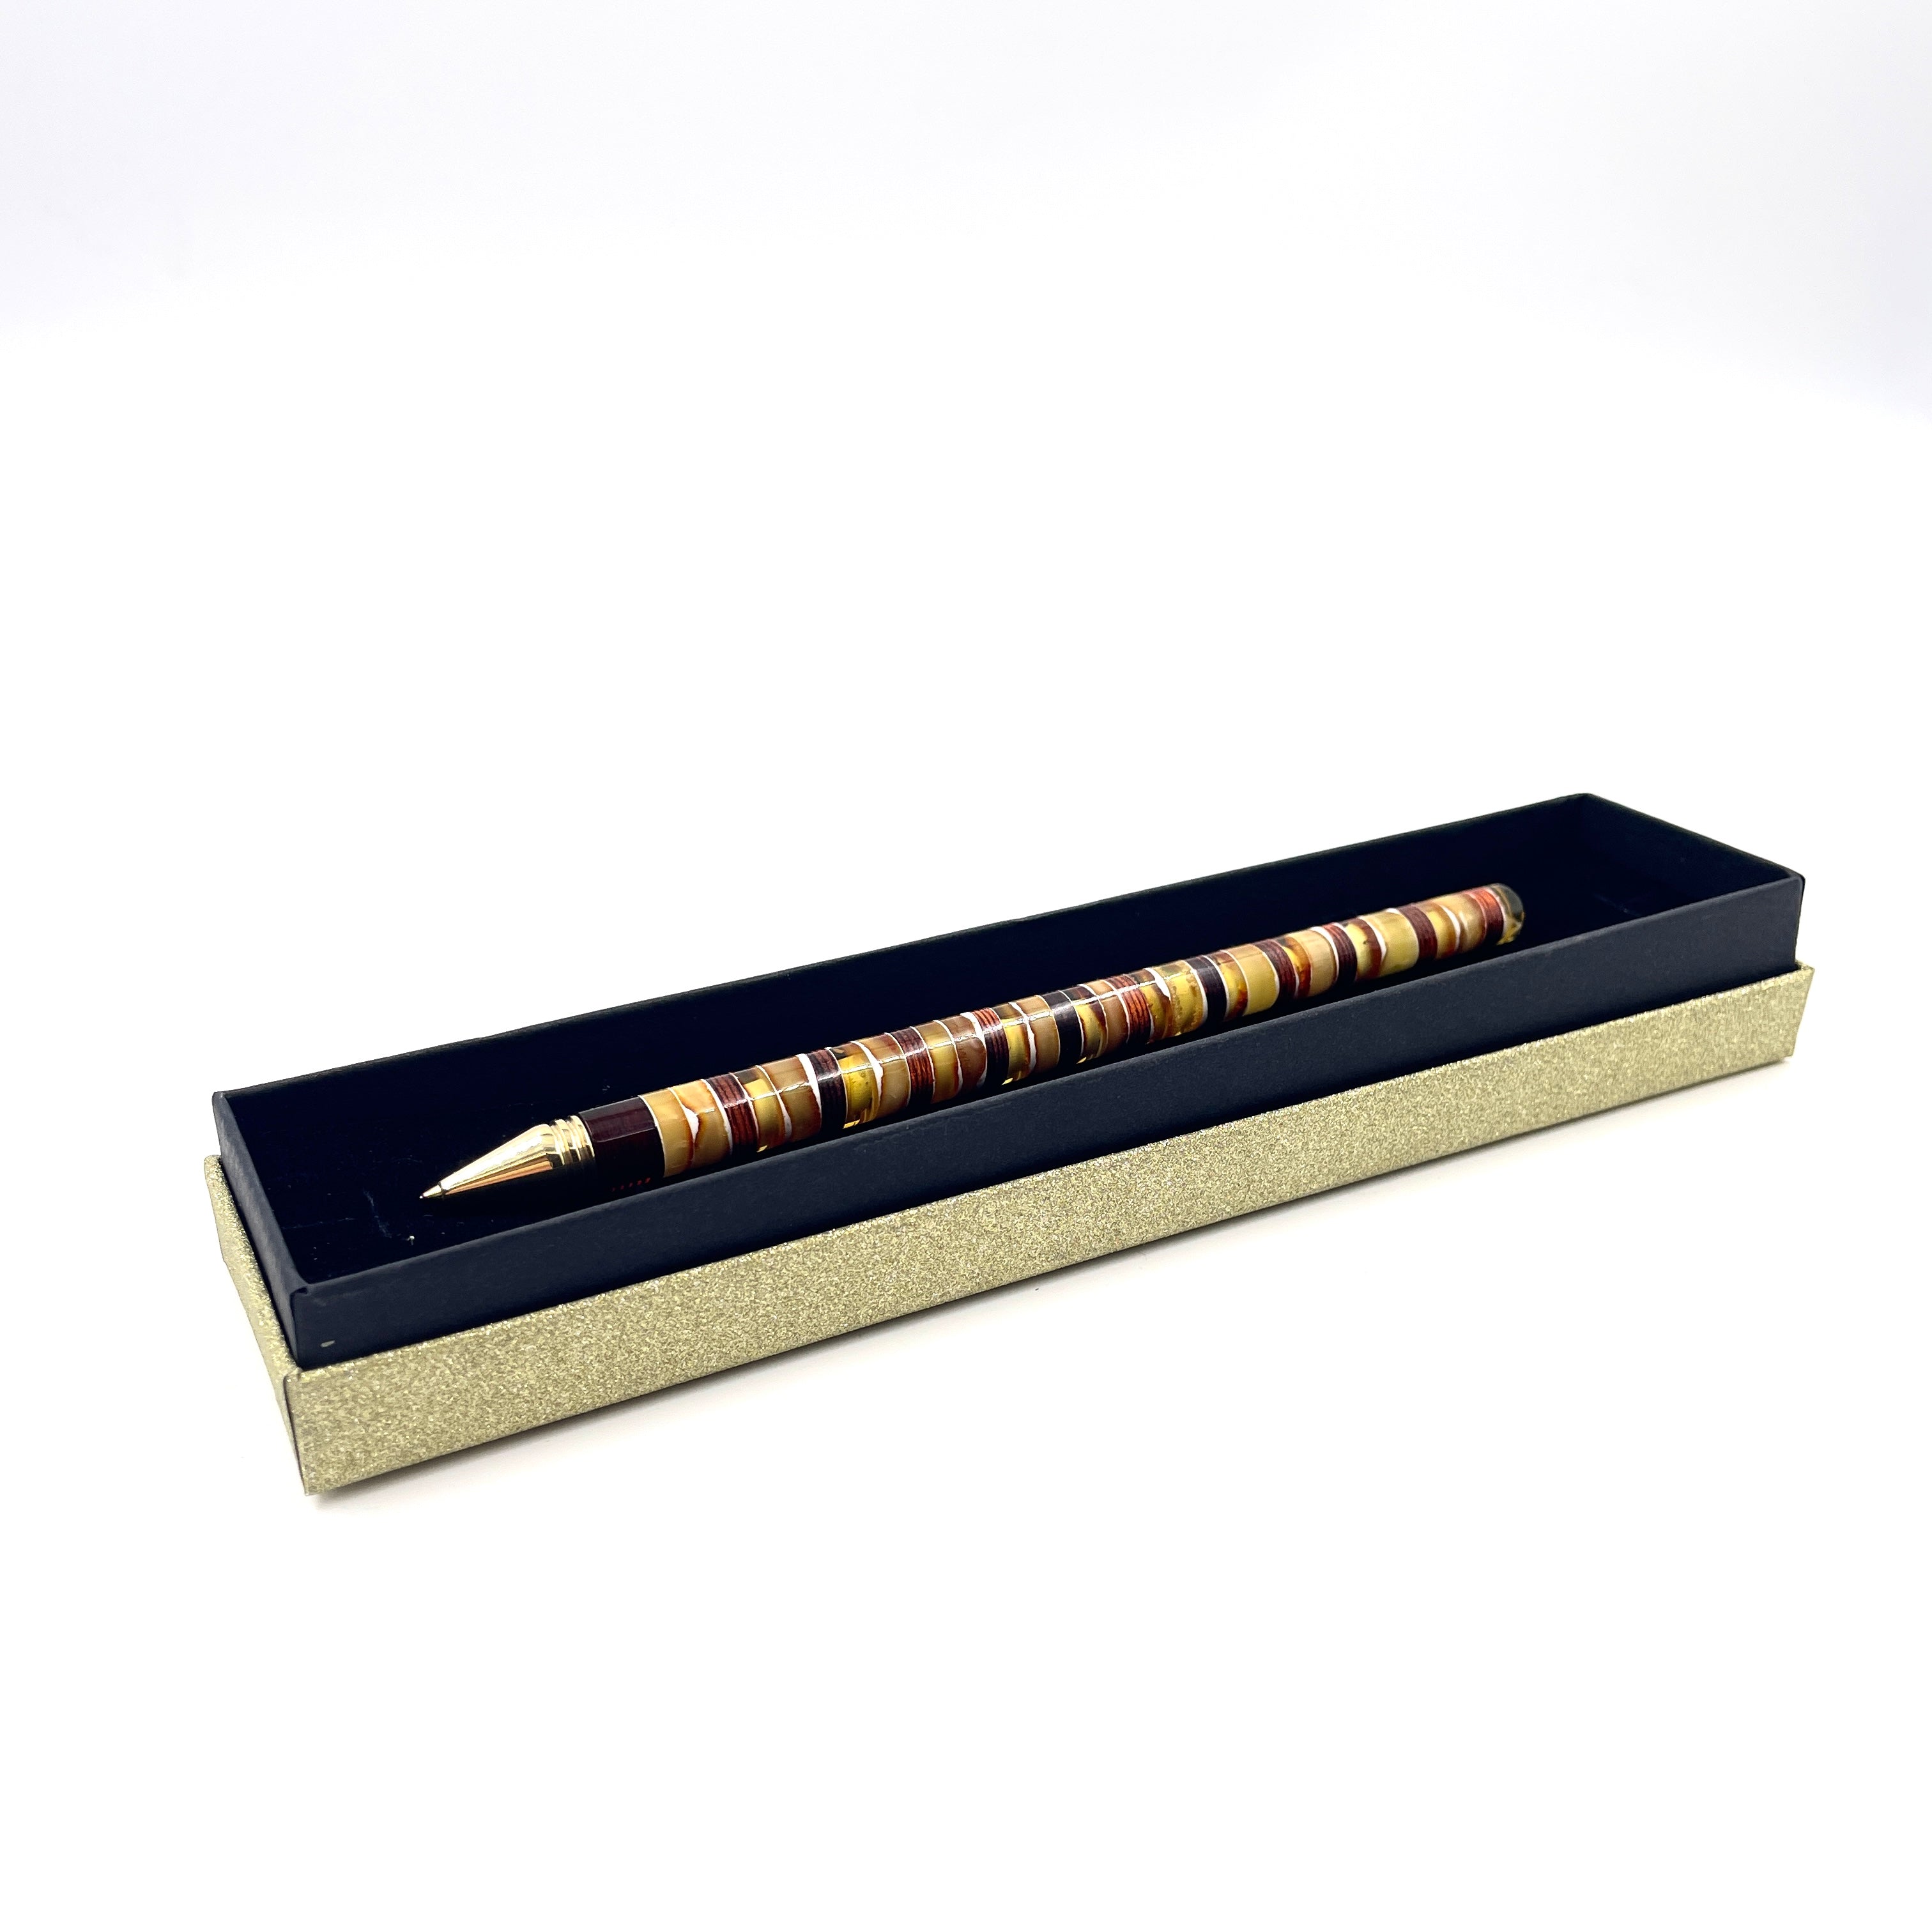 Pen decorated with amber mosaic